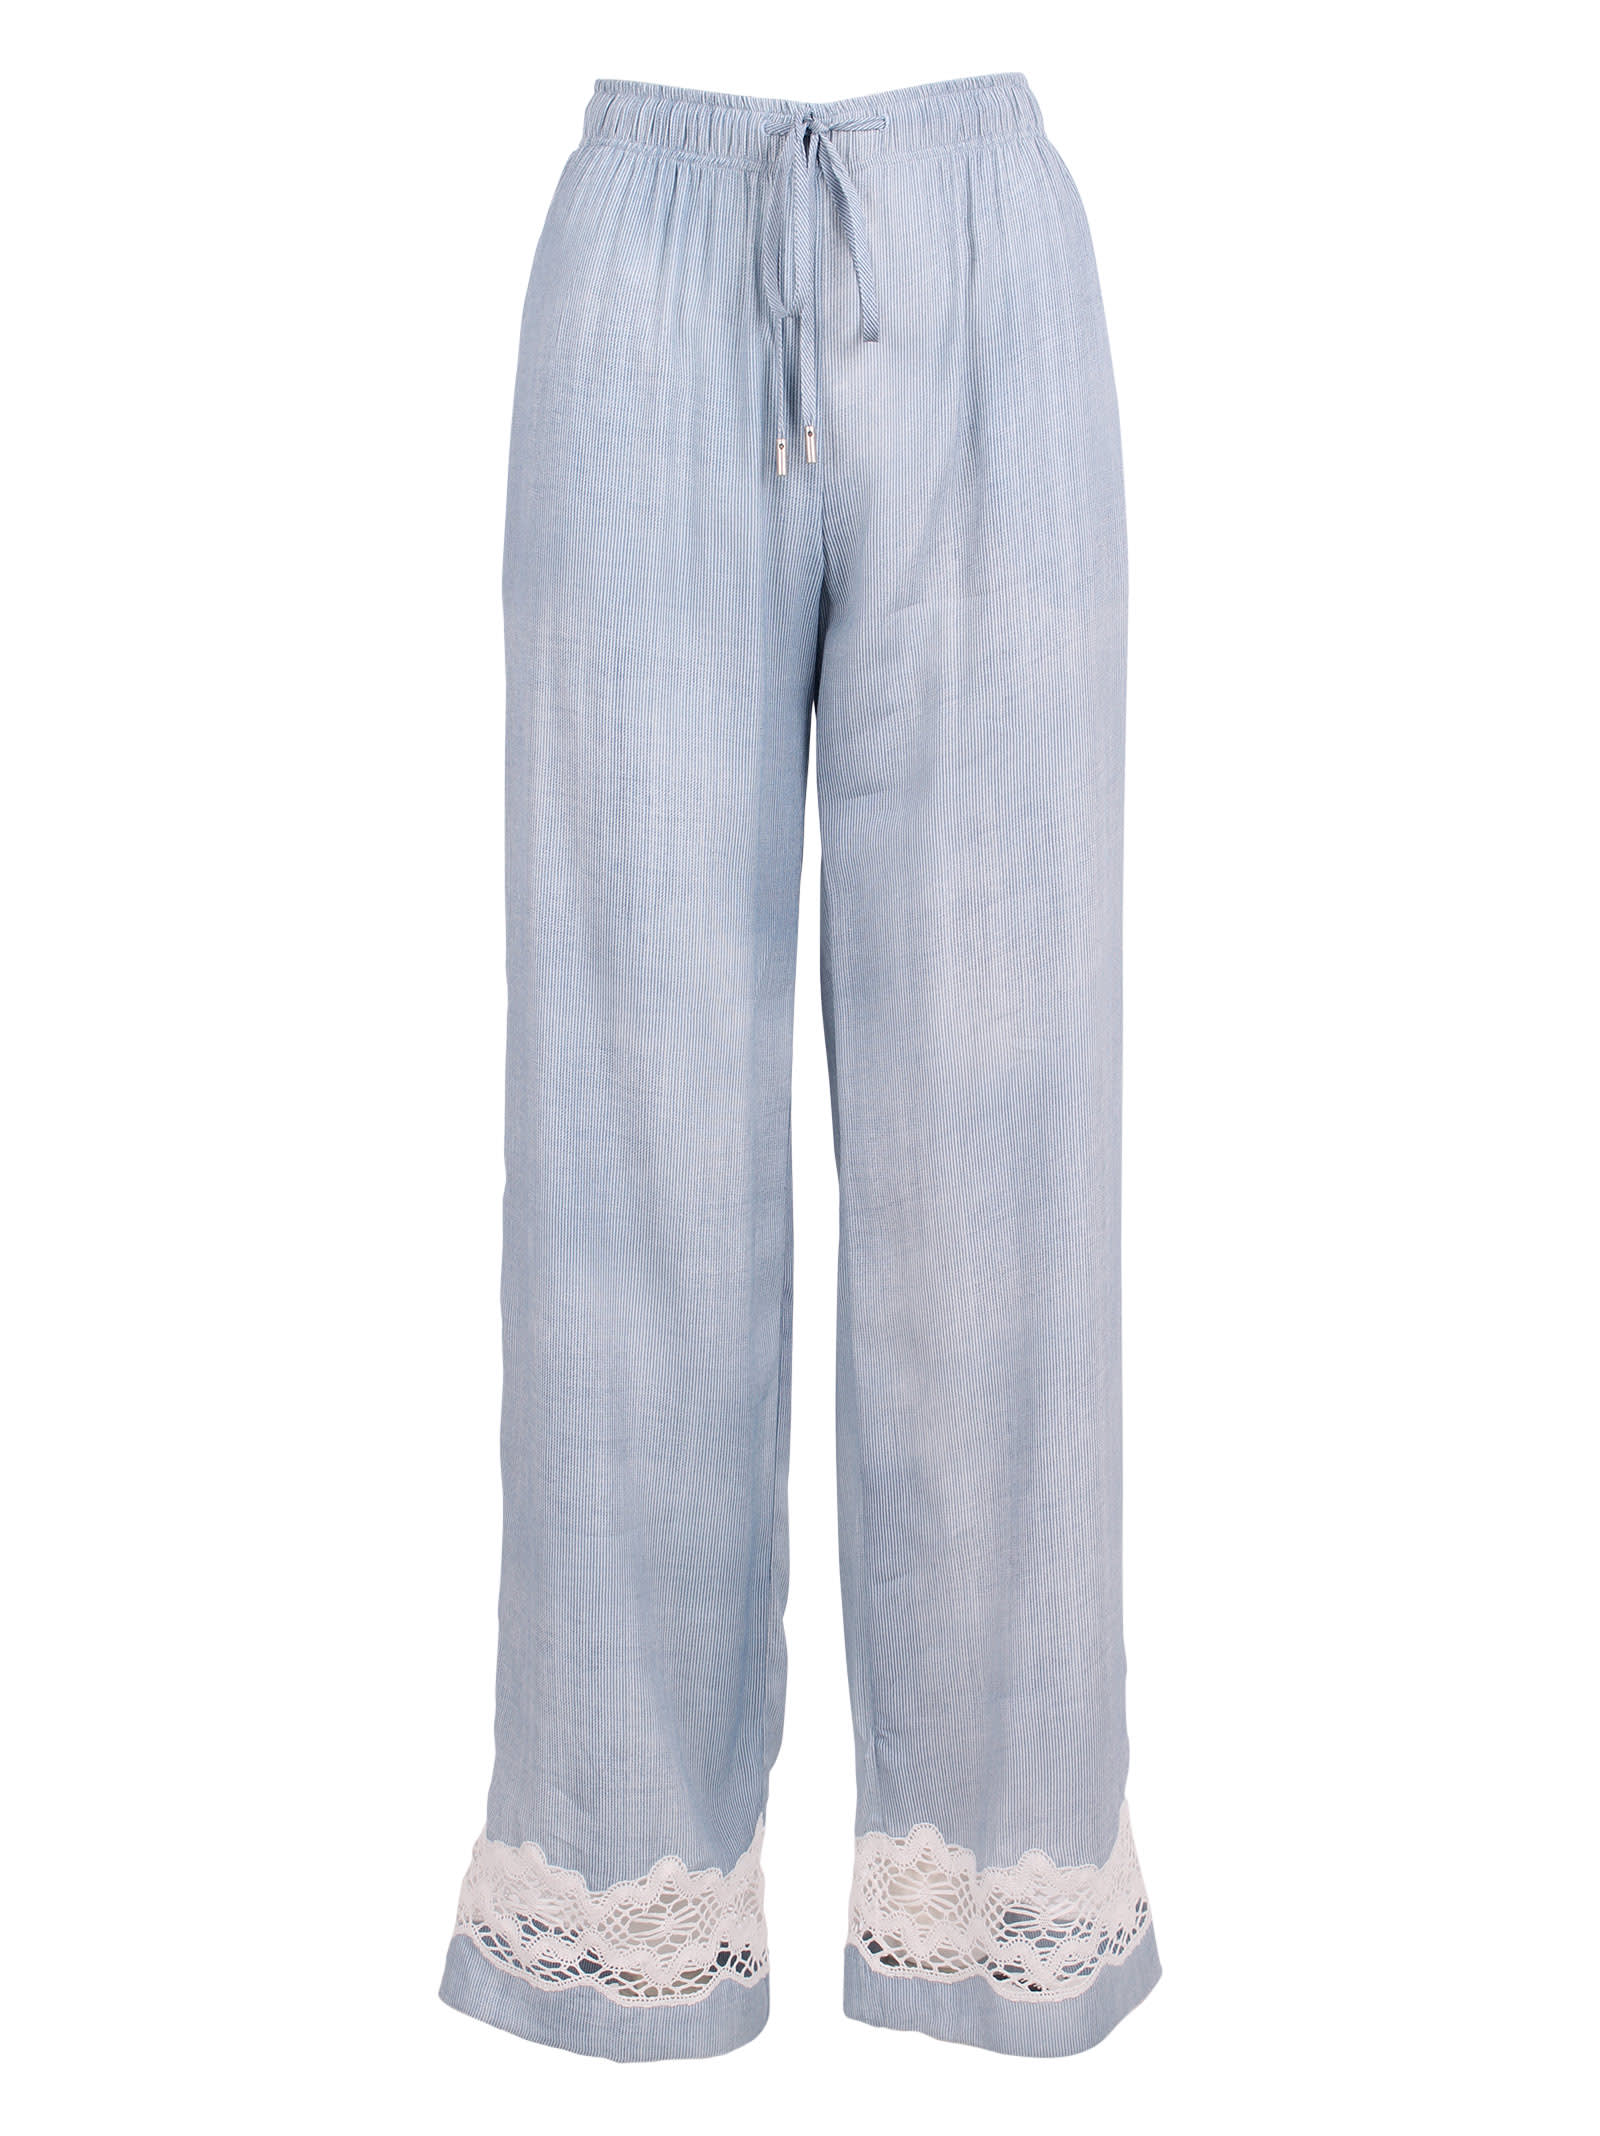 Ermanno Scervino Rayon Trousers With Lace Detail